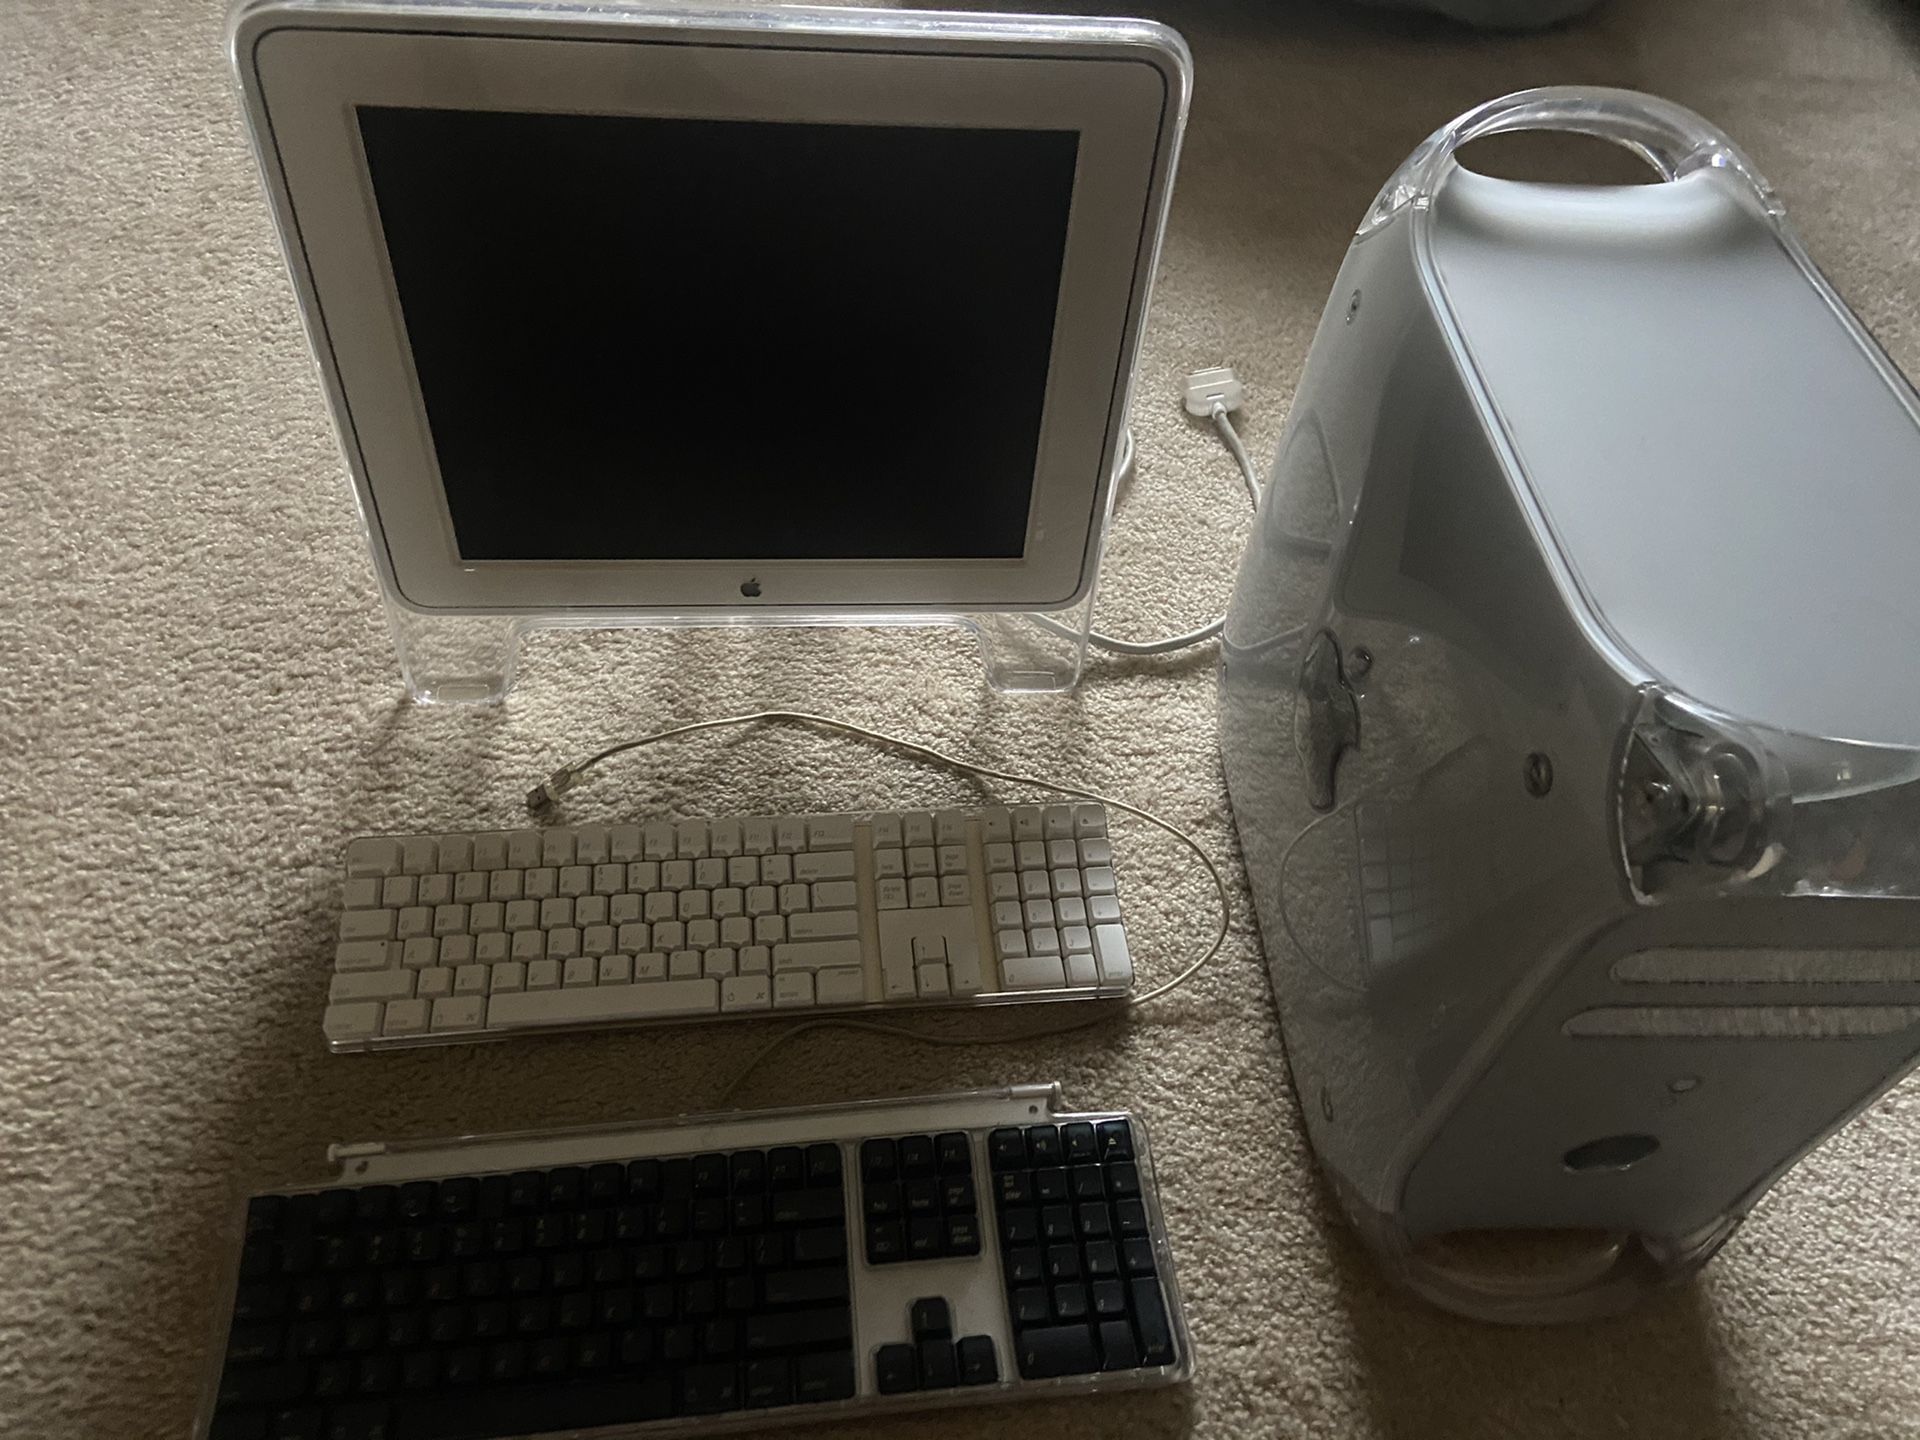 Apple computer with G4 tower and wireless keyboard